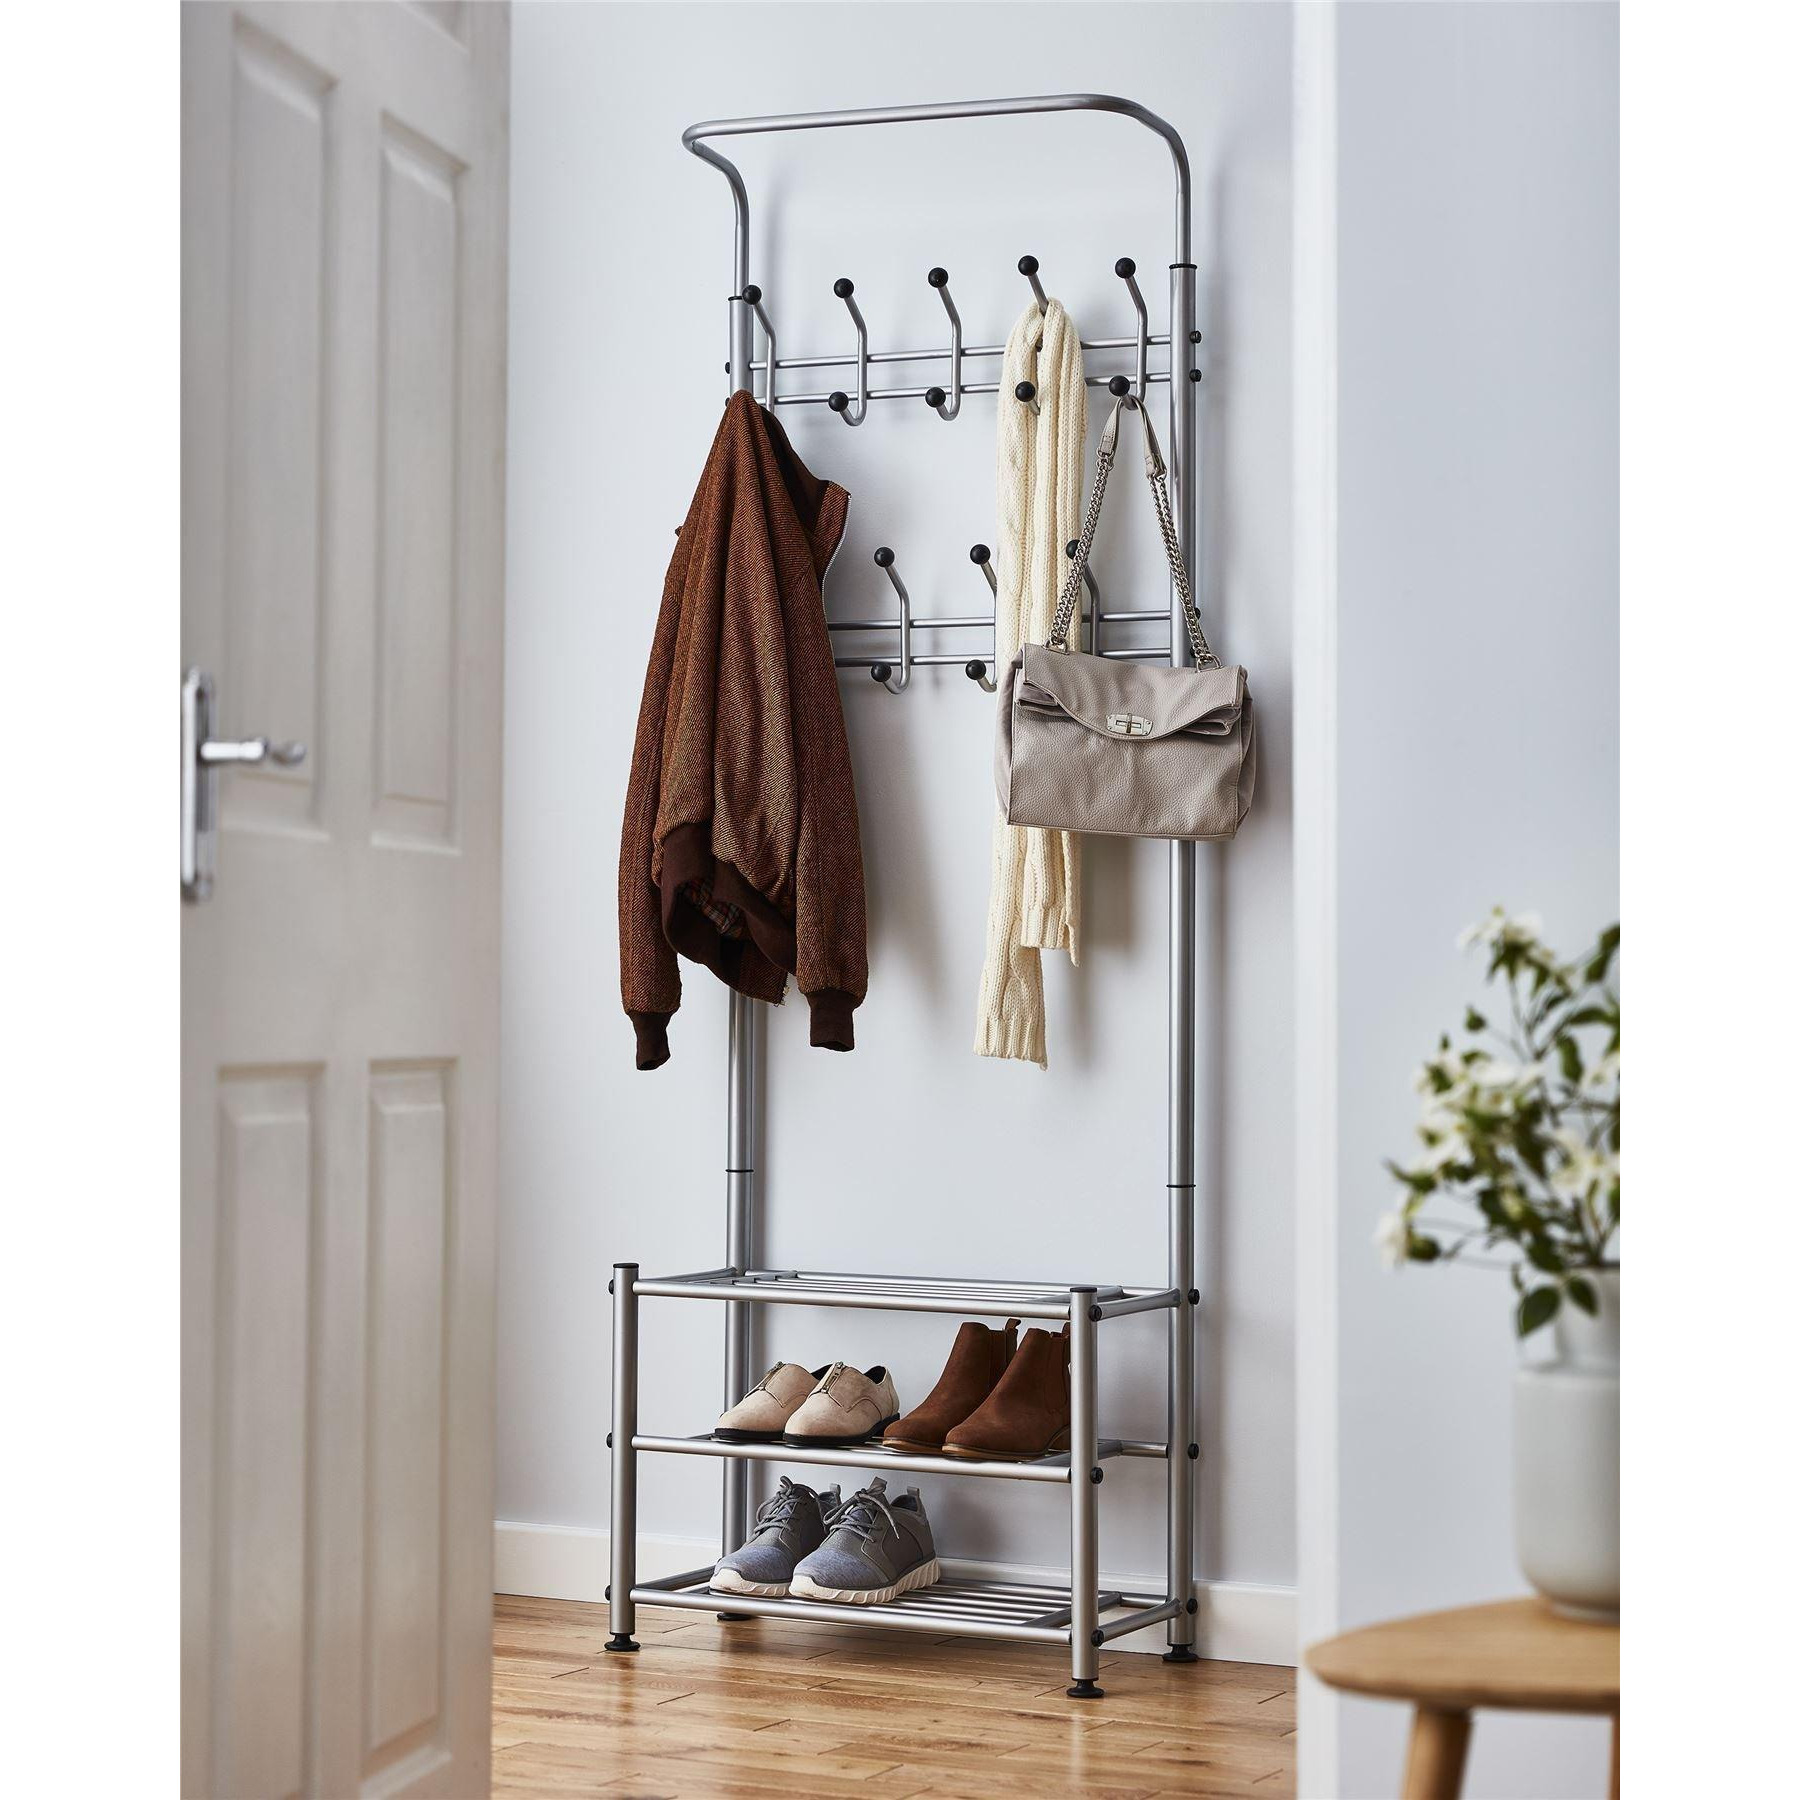 Clothes Stand Hallway Multi Purpose 18 Hooks Jackets Hats Bags 2 Shelves For Shoes - image 1